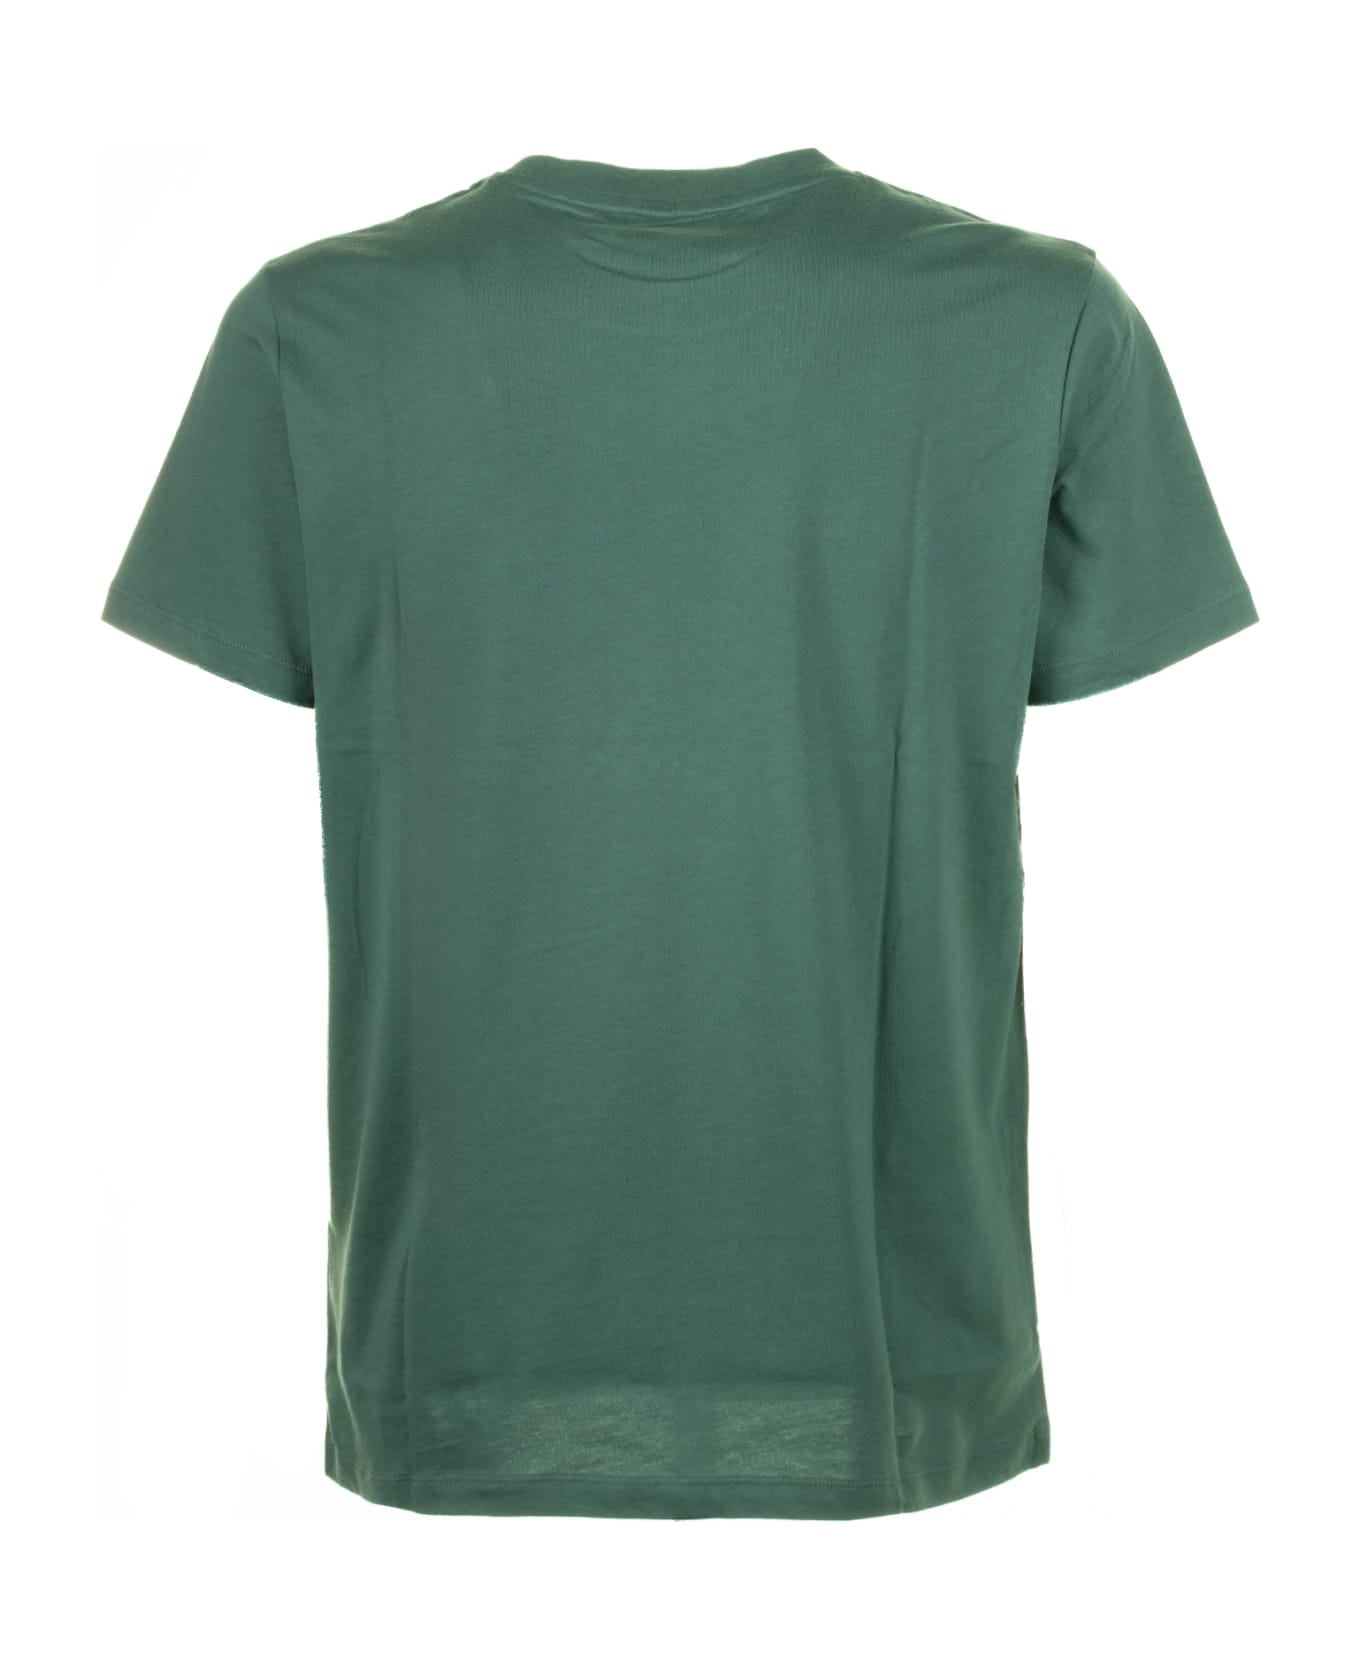 Peuterey Green T-shirt With Pocket - VERDE